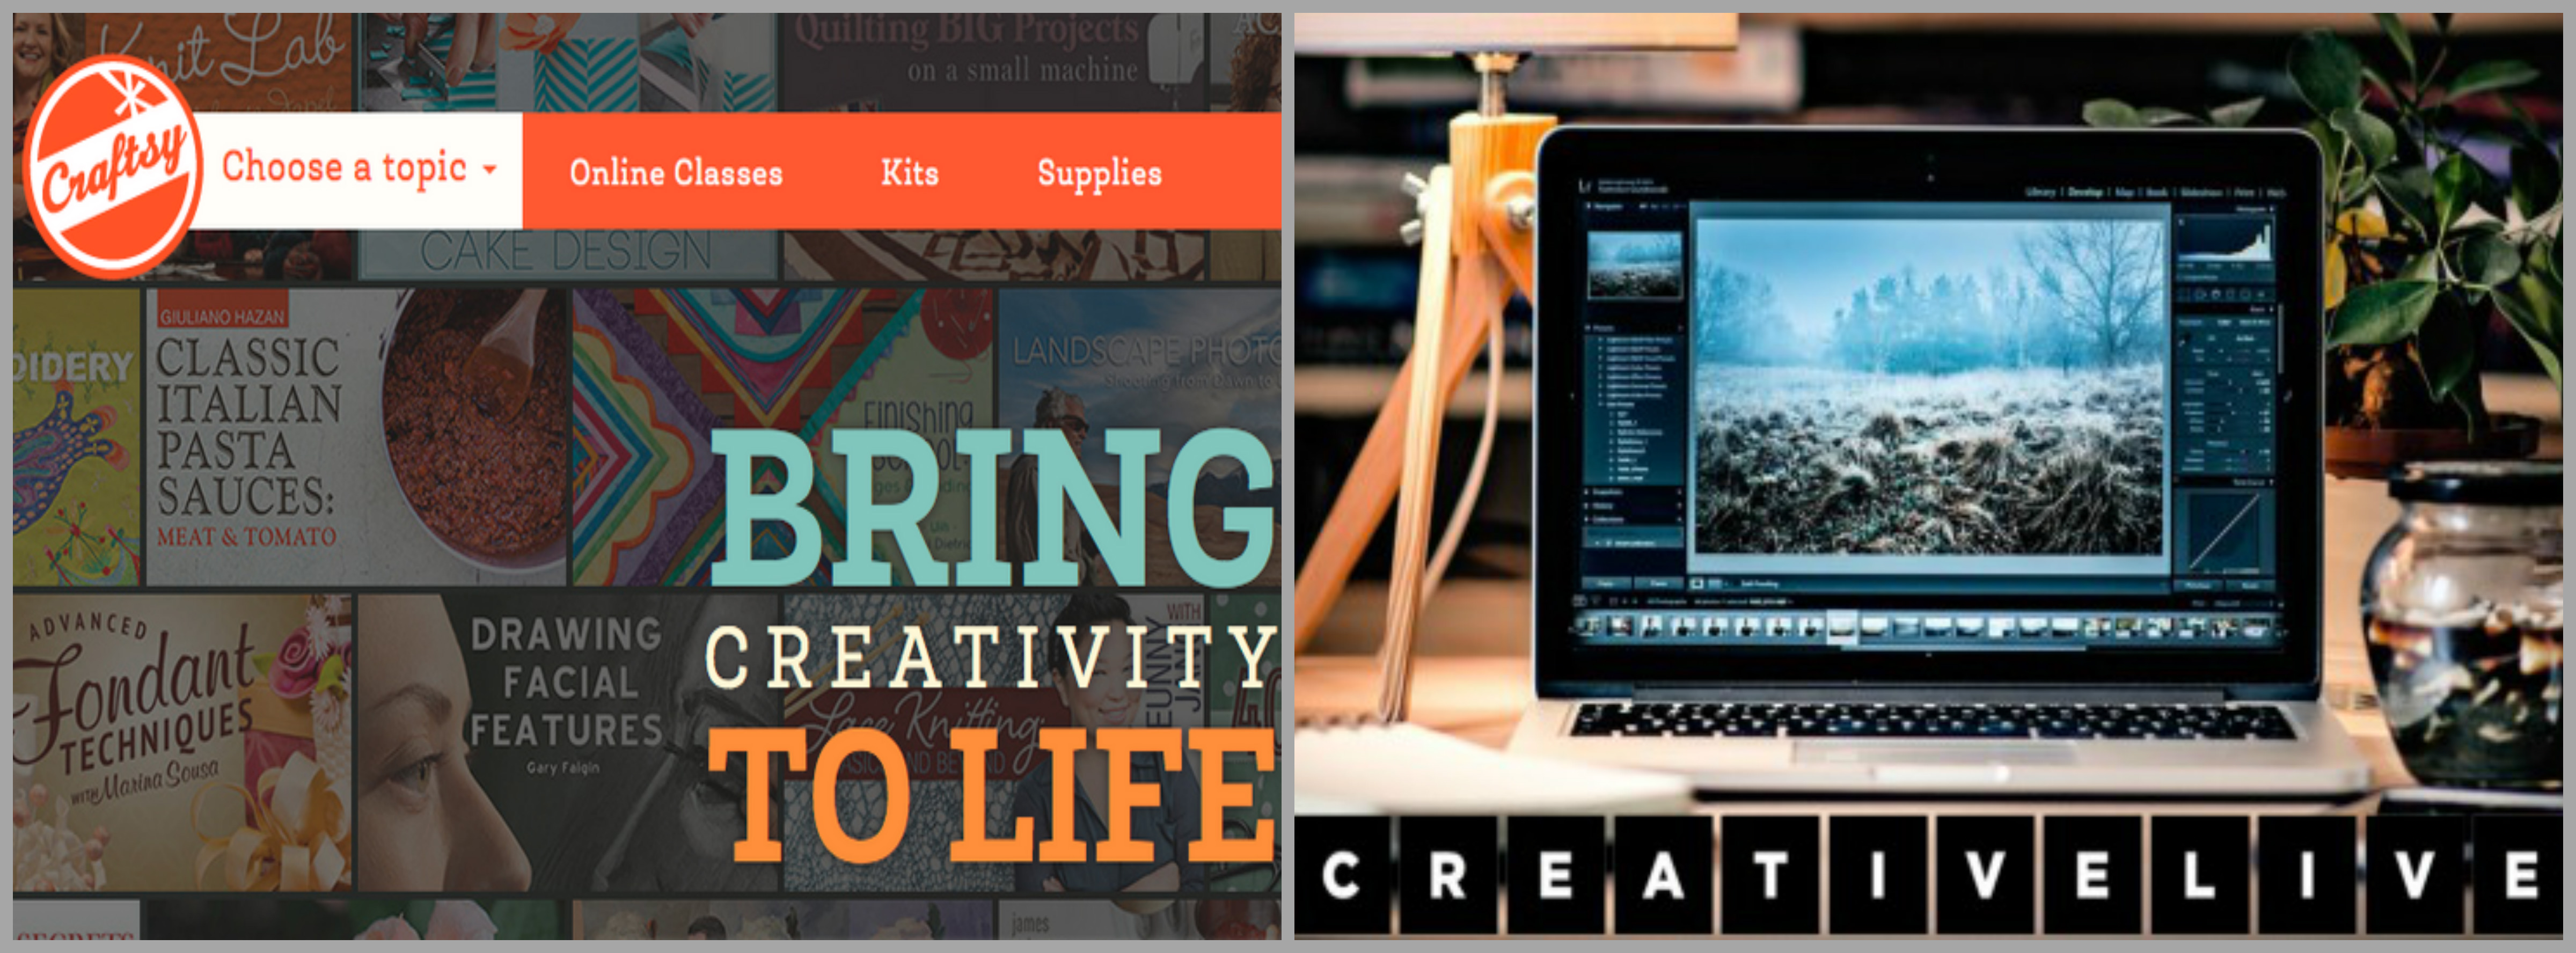 Online Arts And Crafts Classes At Creativelive And Craftsy